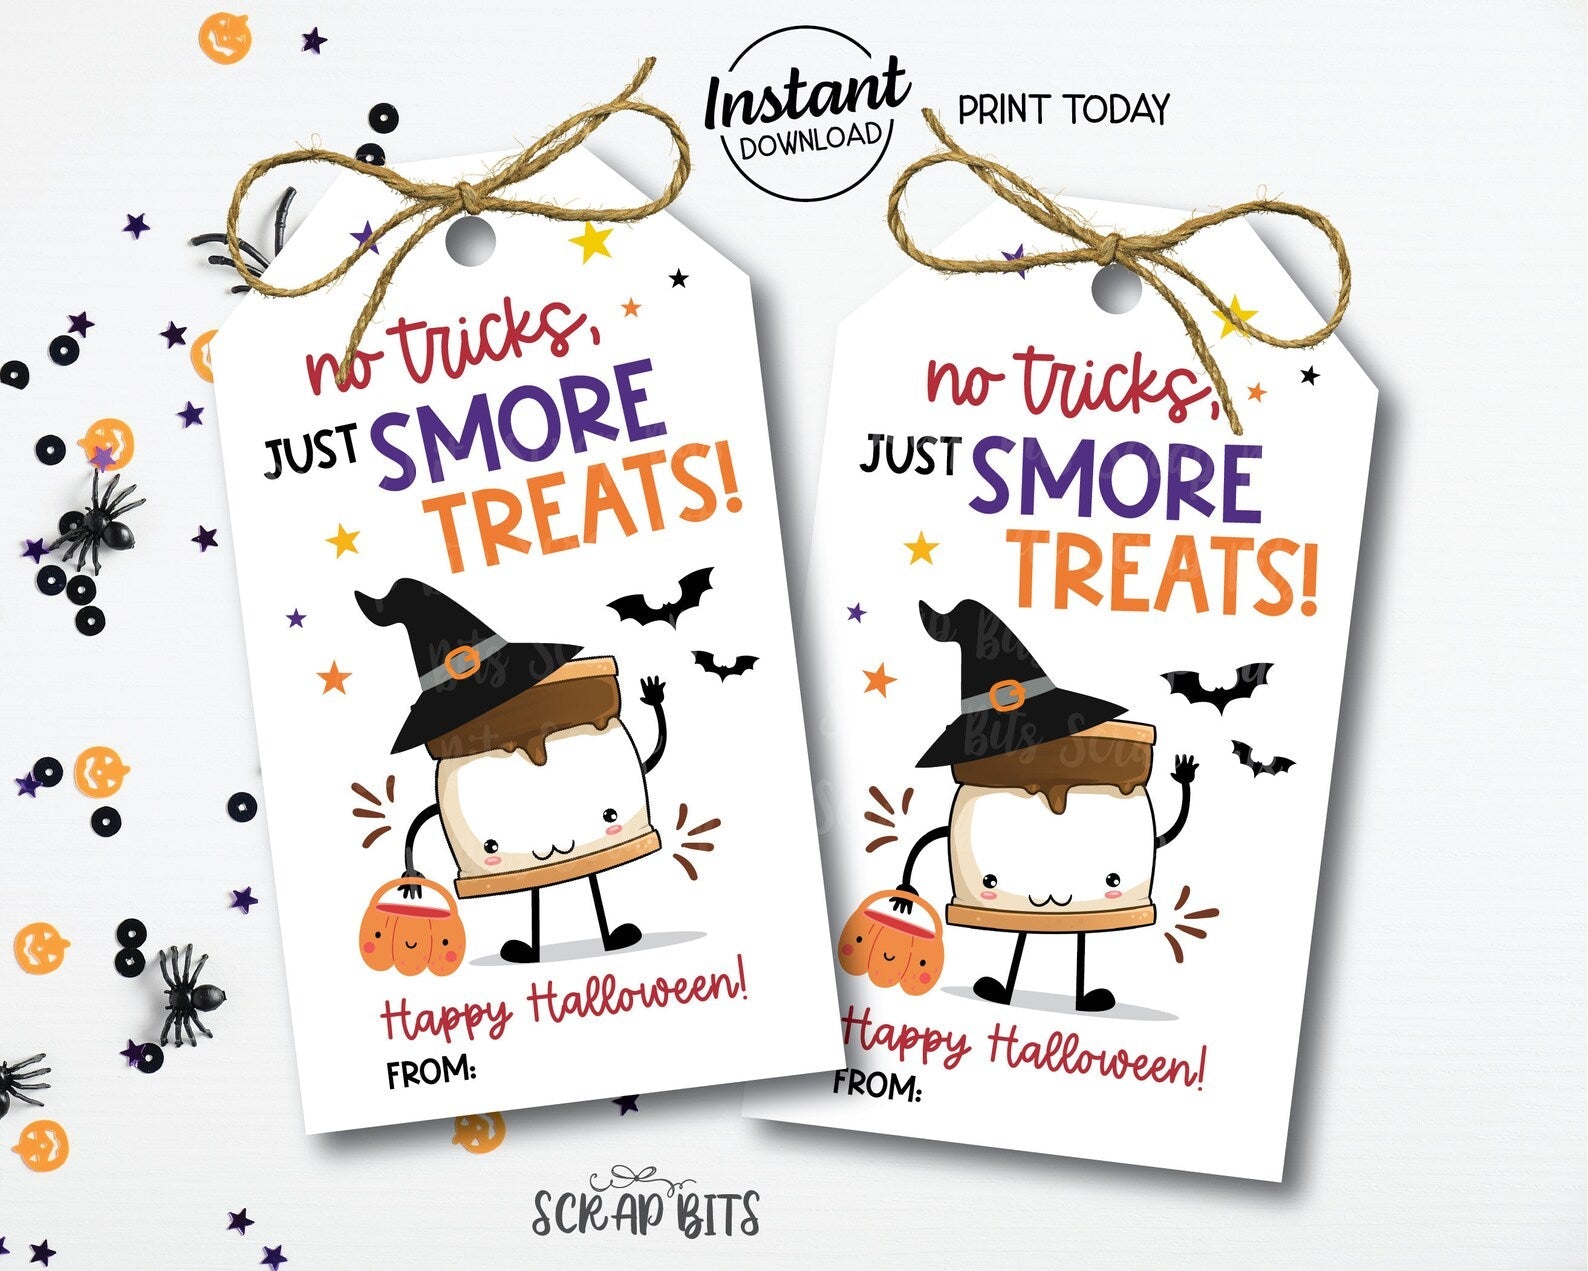 Halloween S'more Tags, No Tricks, Just Smore Treats, Printable Halloween Tags, Instant Download - Scrap Bits